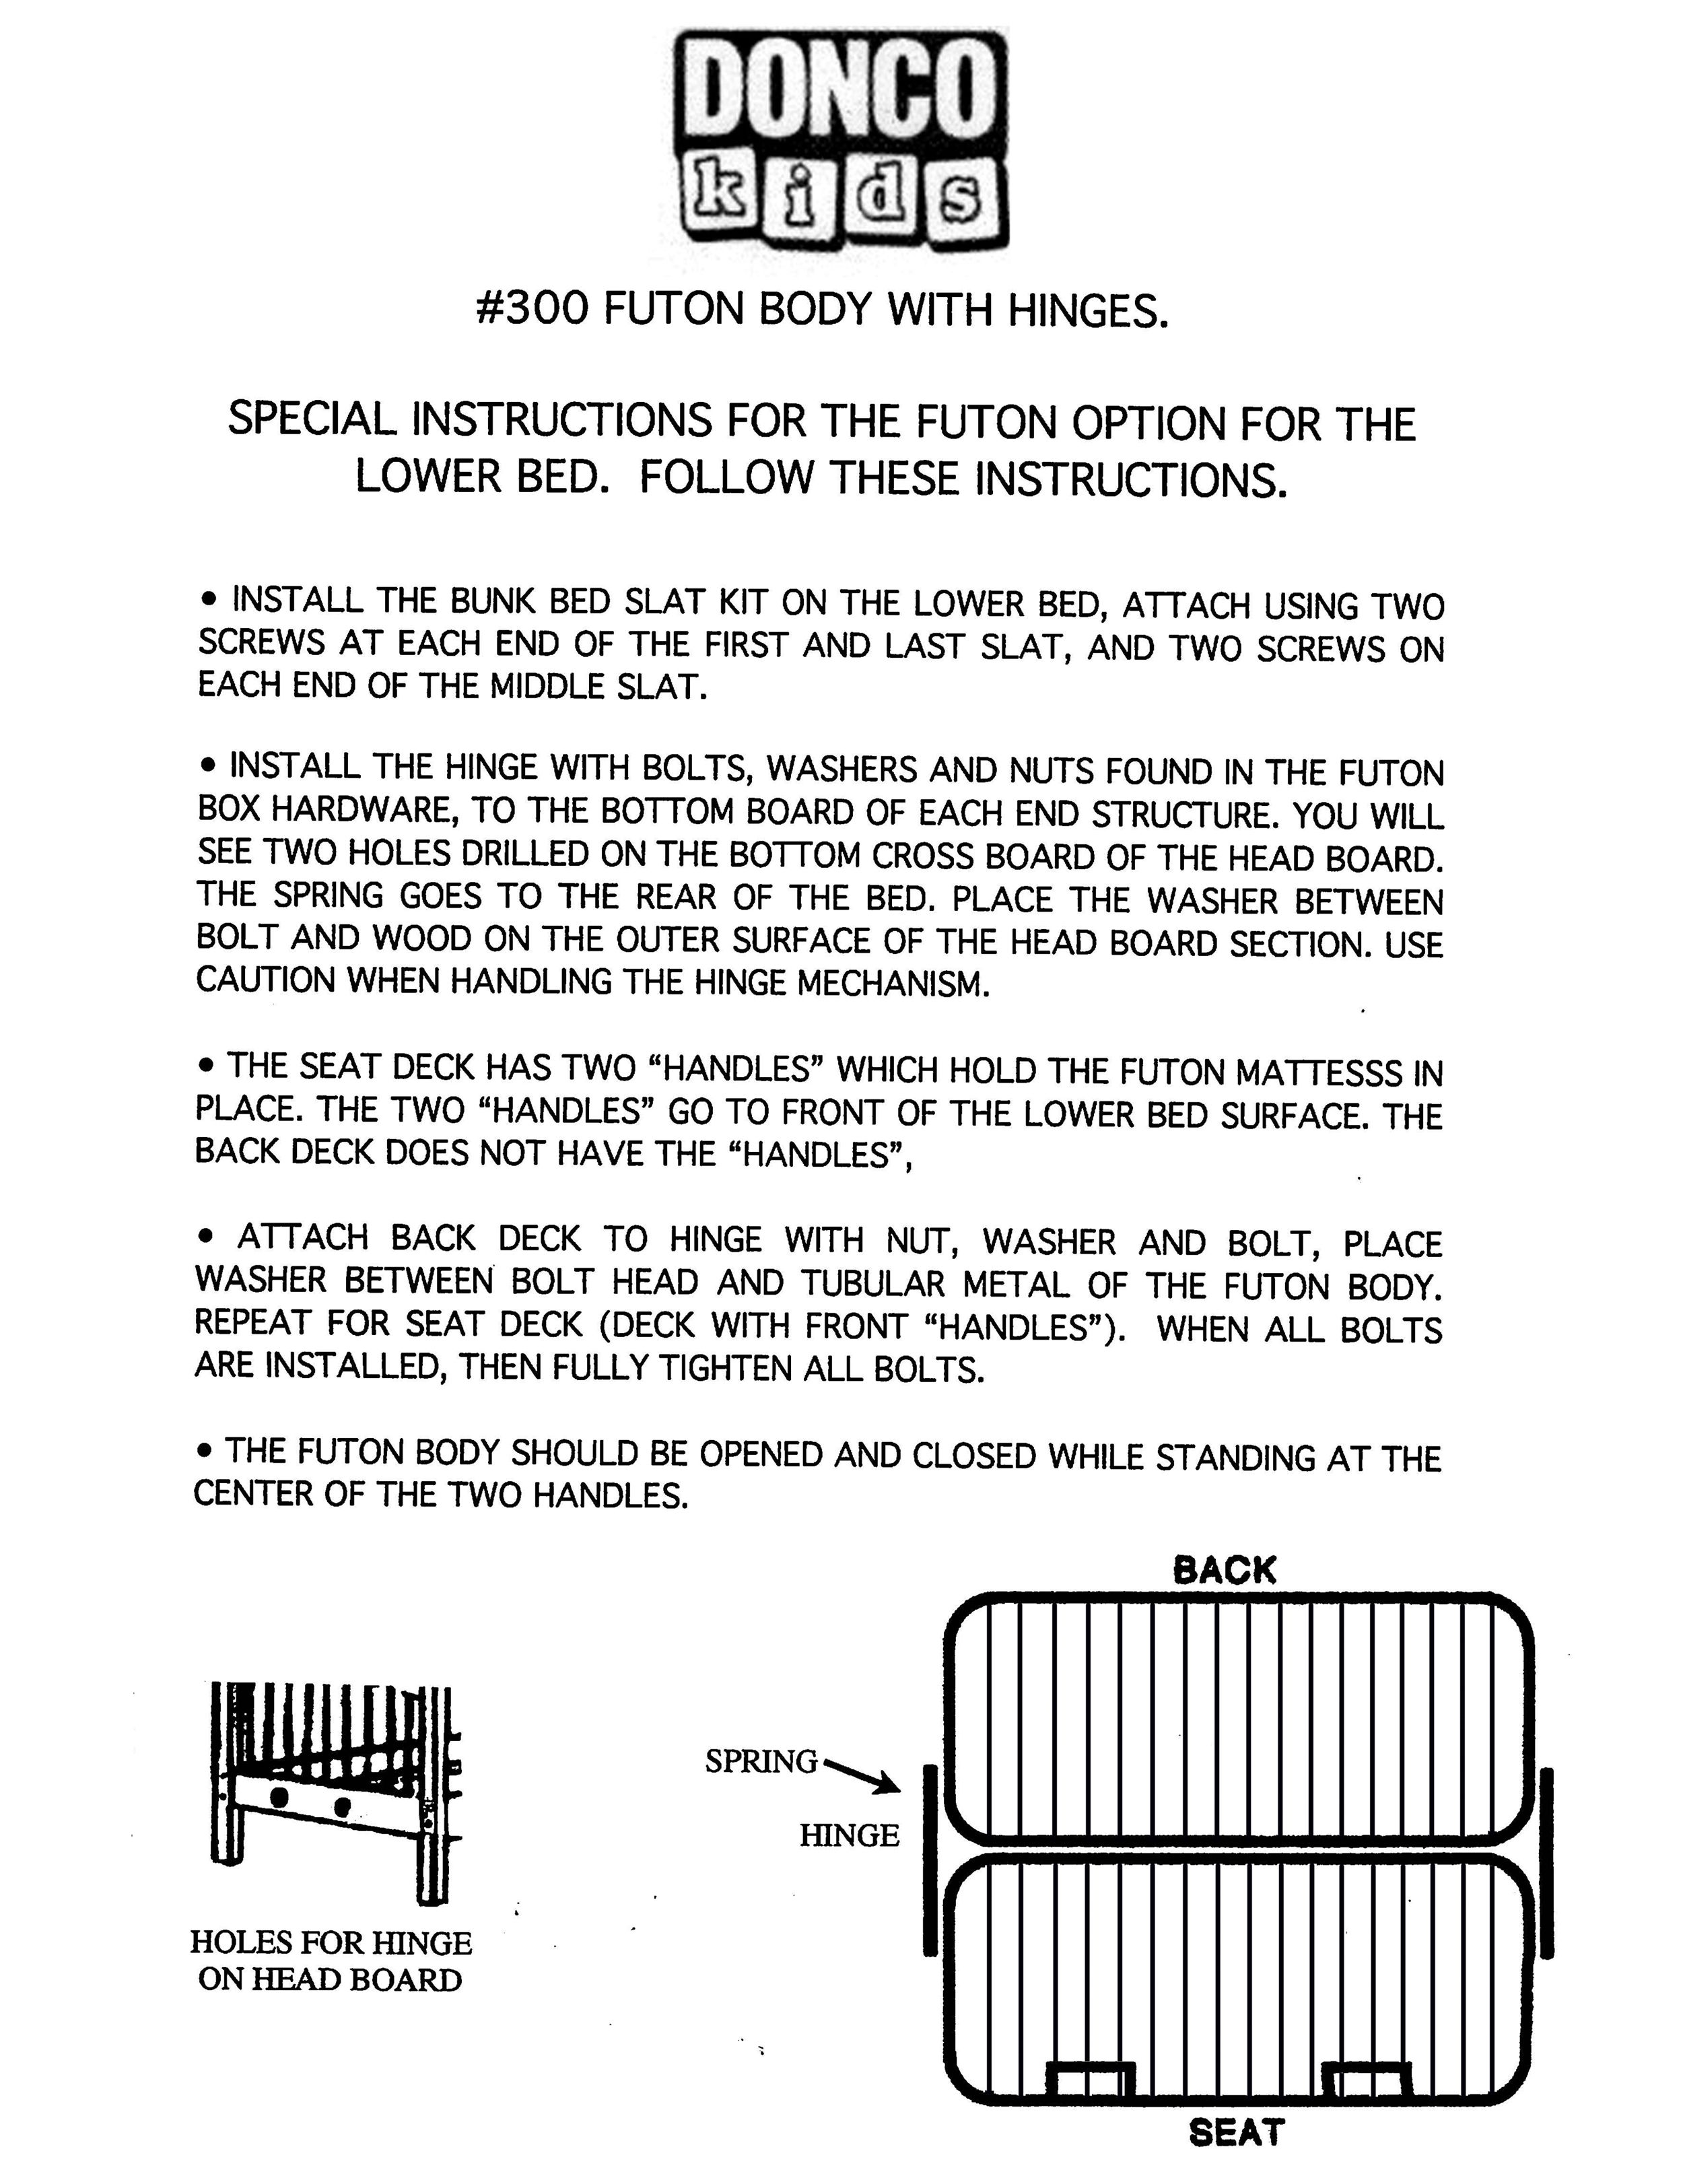 Assembly Instructions Donco Trading Co, Futon Bunk Bed Instructions